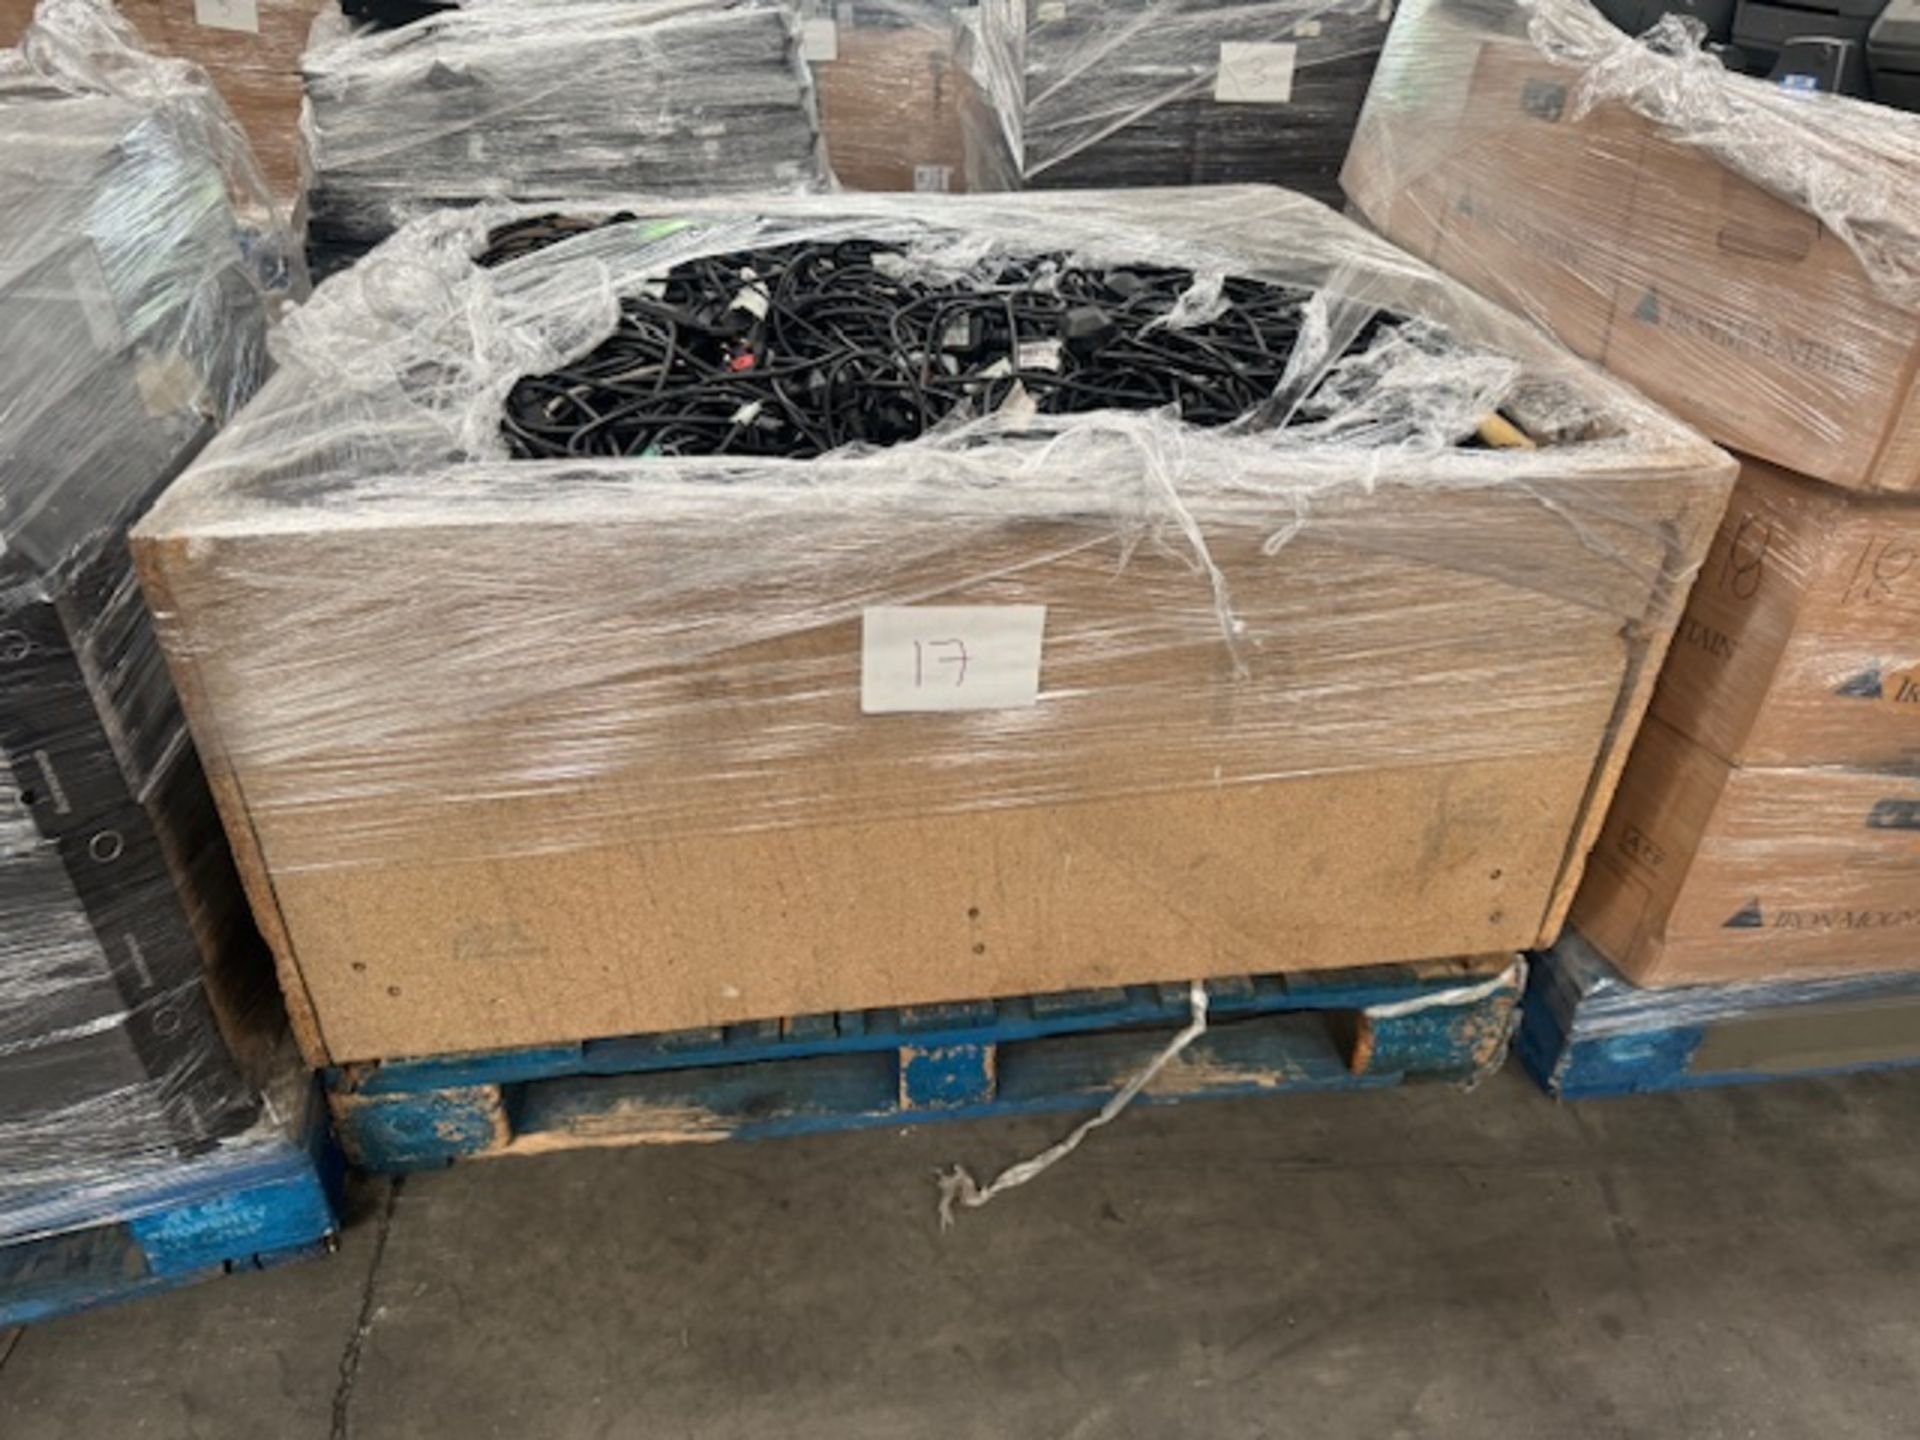 IT PALLET LOT INCLUDING A VERY LARGE VOLUME OF SPARE LAPTOP/PC POWER CABLES IN VARIOUS BRANDS AND - Image 2 of 3